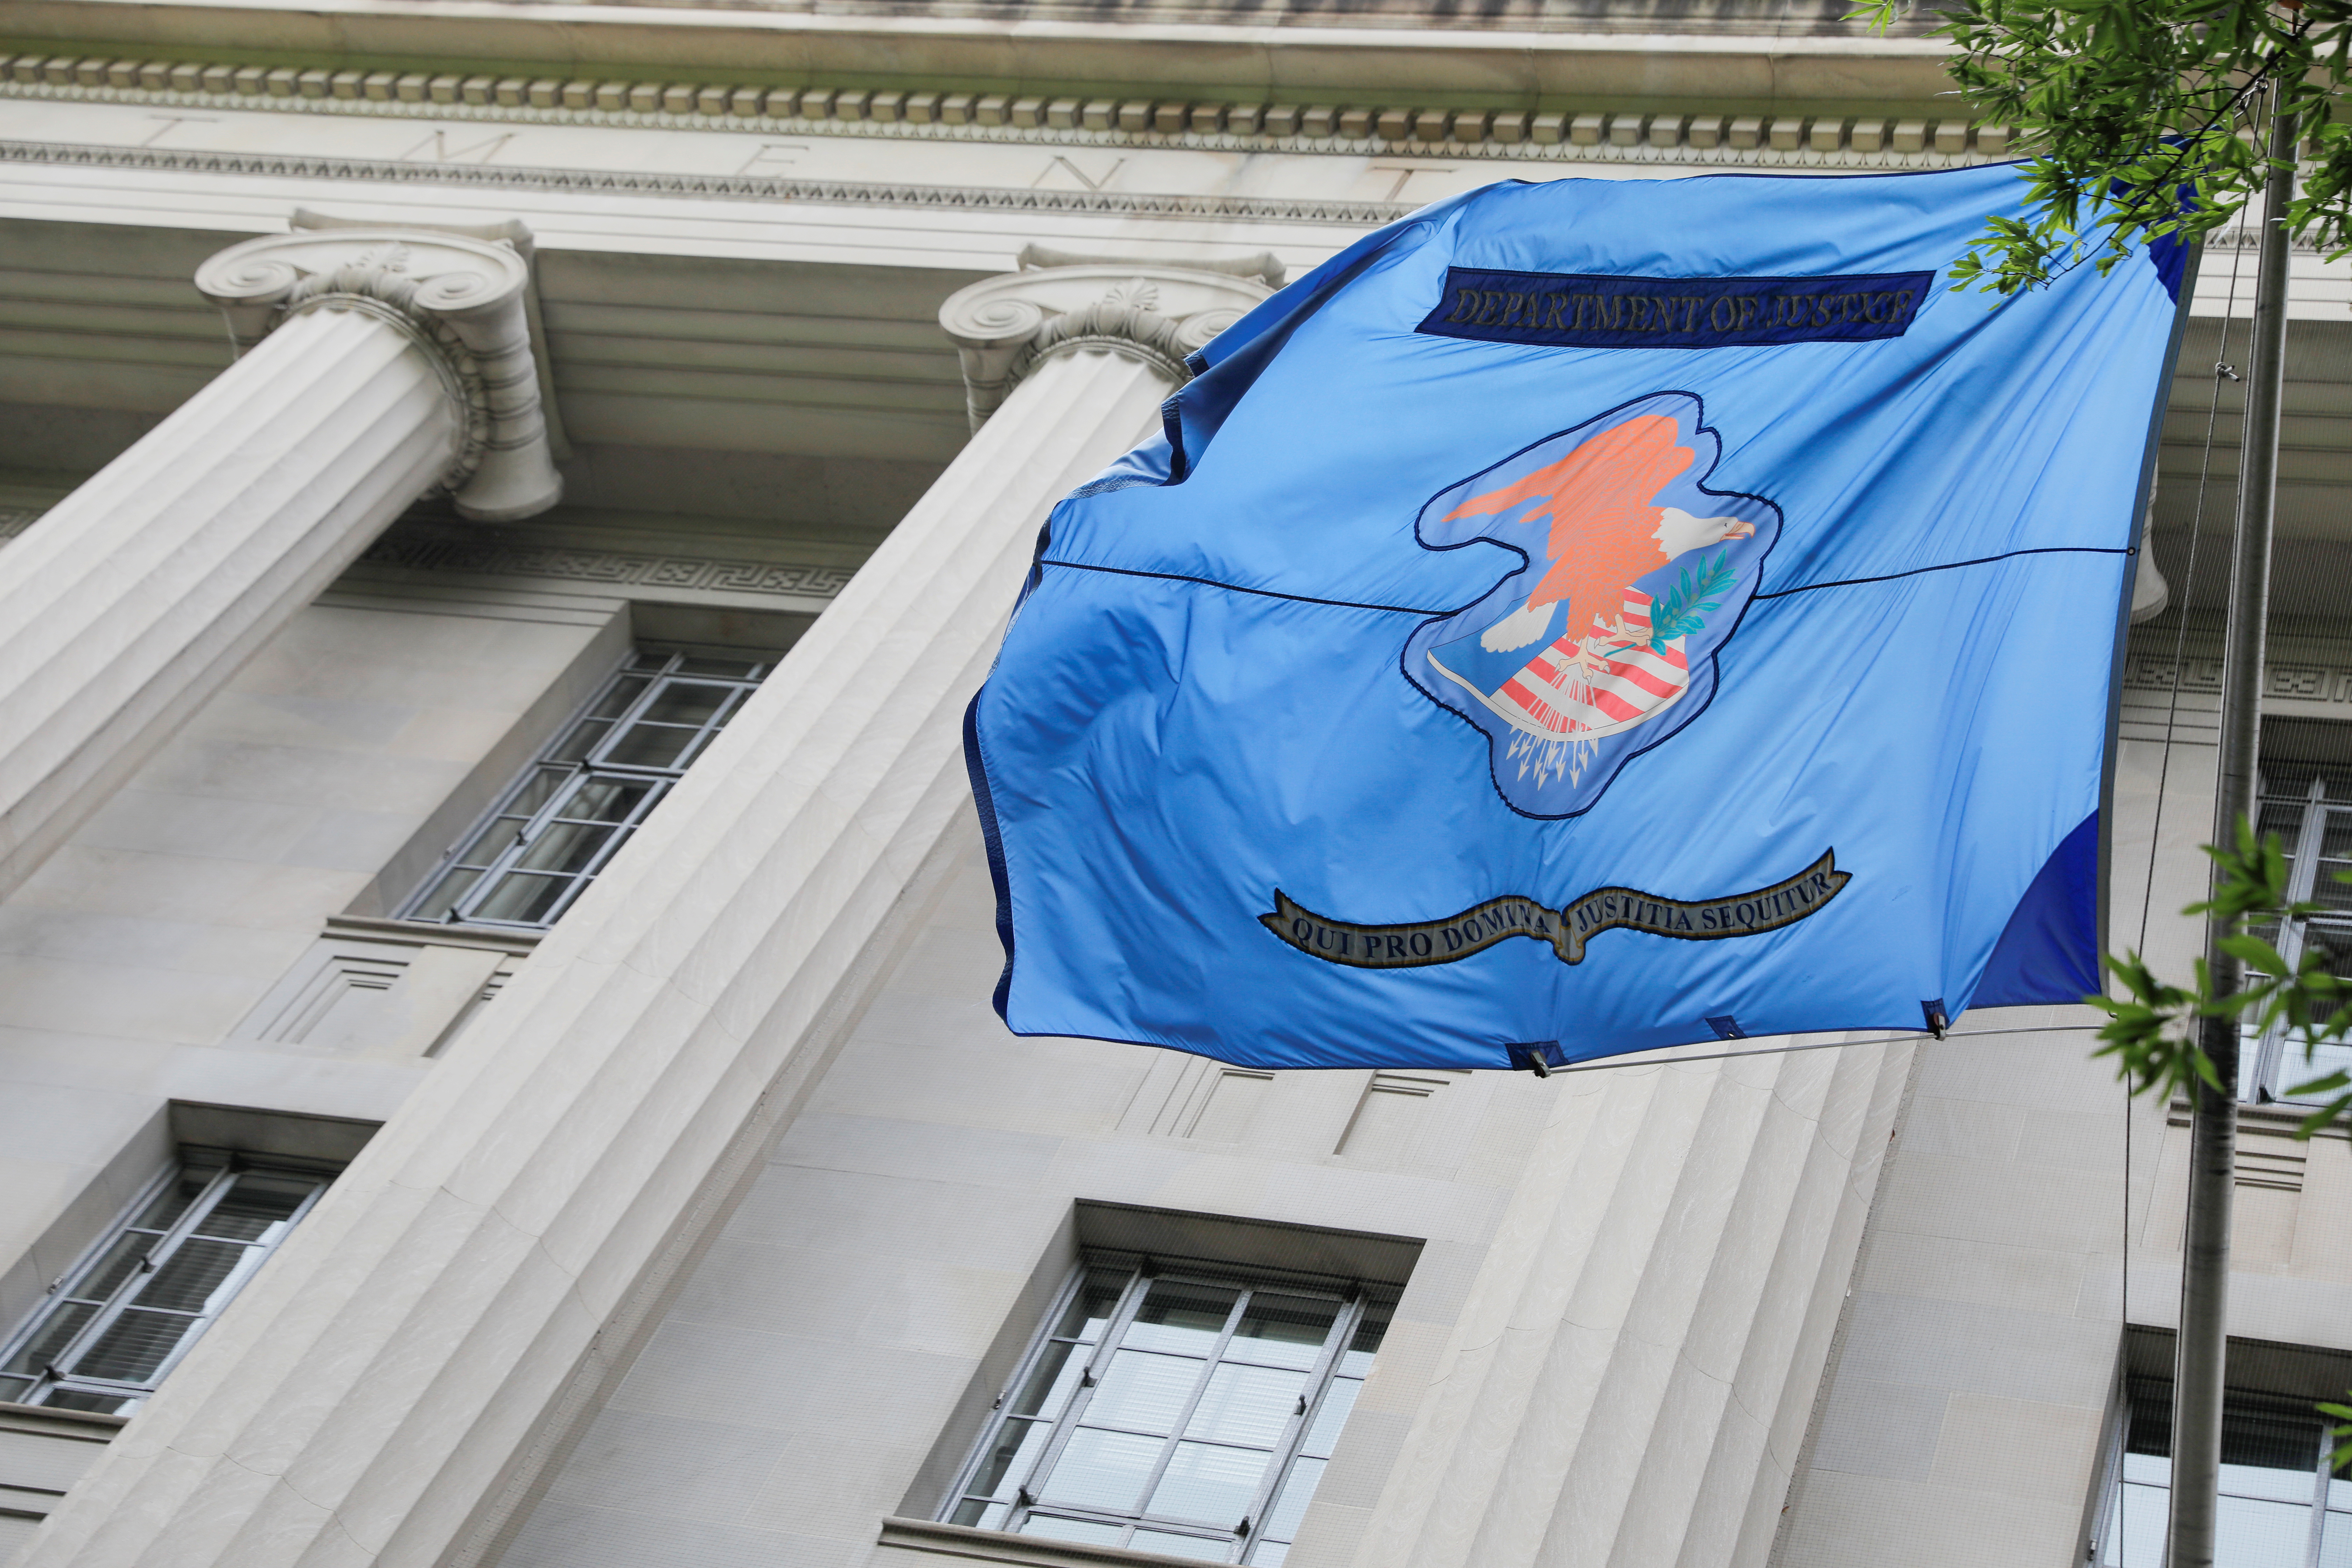 The flag and crest of the United States Department of Justice (DOJ) is seen at their headquarters in Washington, D.C.